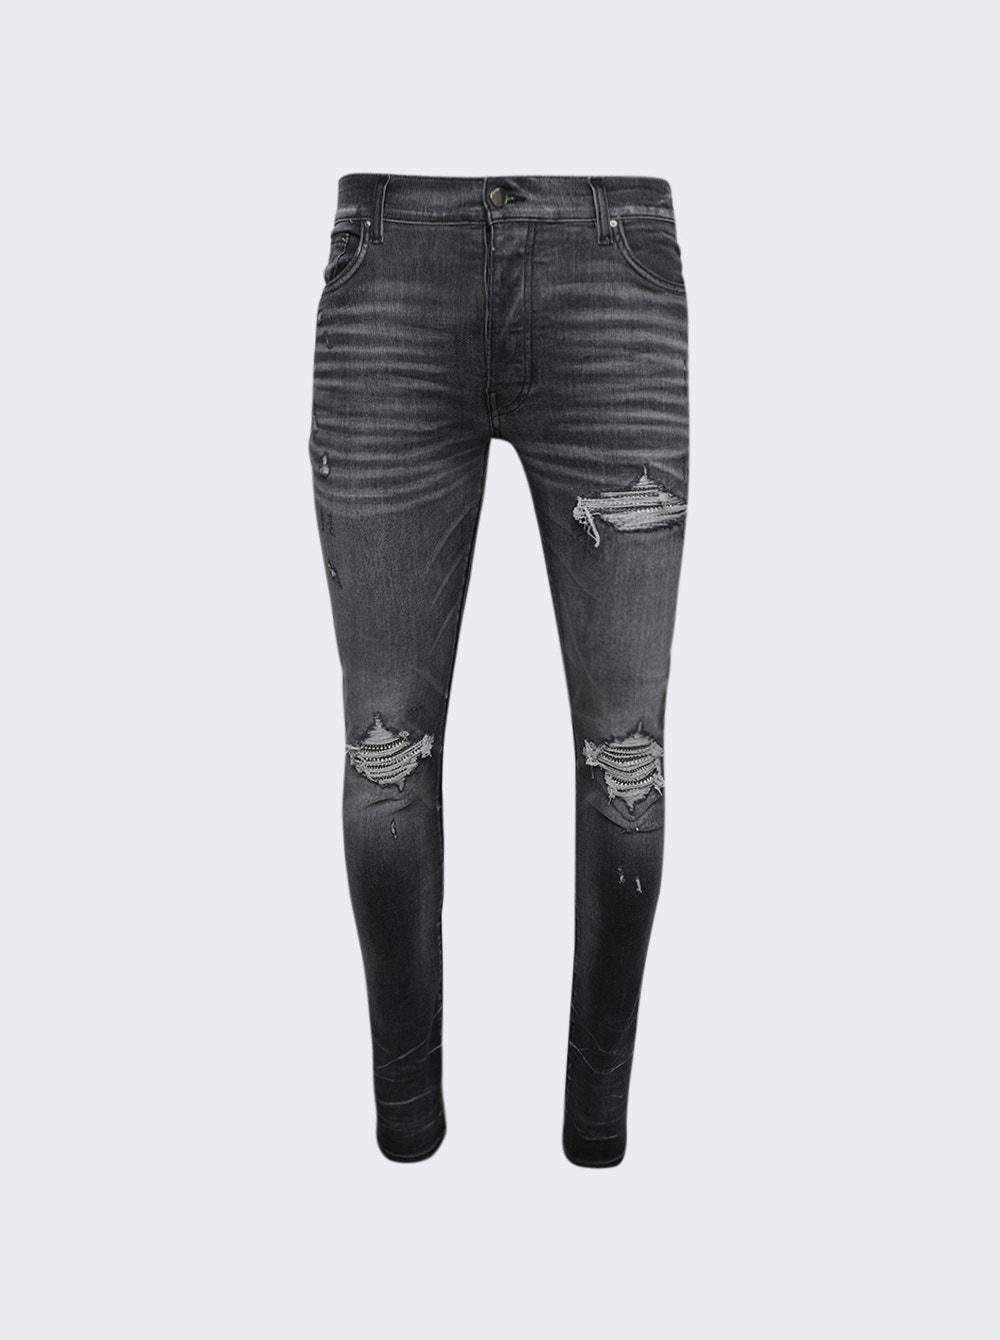 Crystal Mx1 Jeans Storm Grey  | The Webster by AMIRI